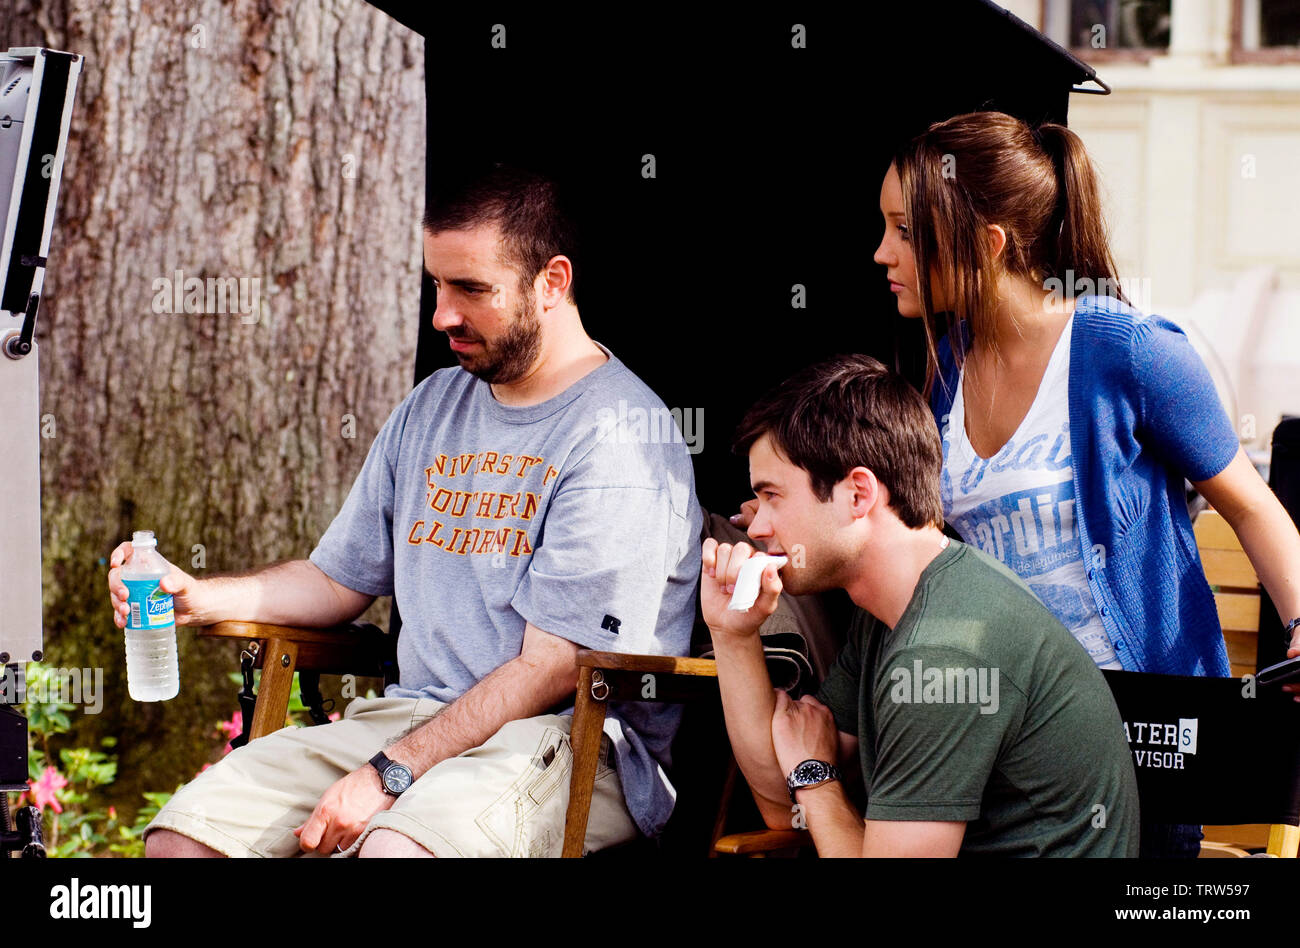 AMANDA BYNES , MATT LONG and JOE NUSSBAUM in SYDNEY WHITE (2007). Copyright: Editorial use only. No merchandising or book covers. This is a publicly distributed handout. Access rights only, no license of copyright provided. Only to be reproduced in conjunction with promotion of this film. Credit: MORGAN CREEK PROD./SW7D PROD./CLIFFORD WERBER PROD. / PAGE, GENE / Album Stock Photo